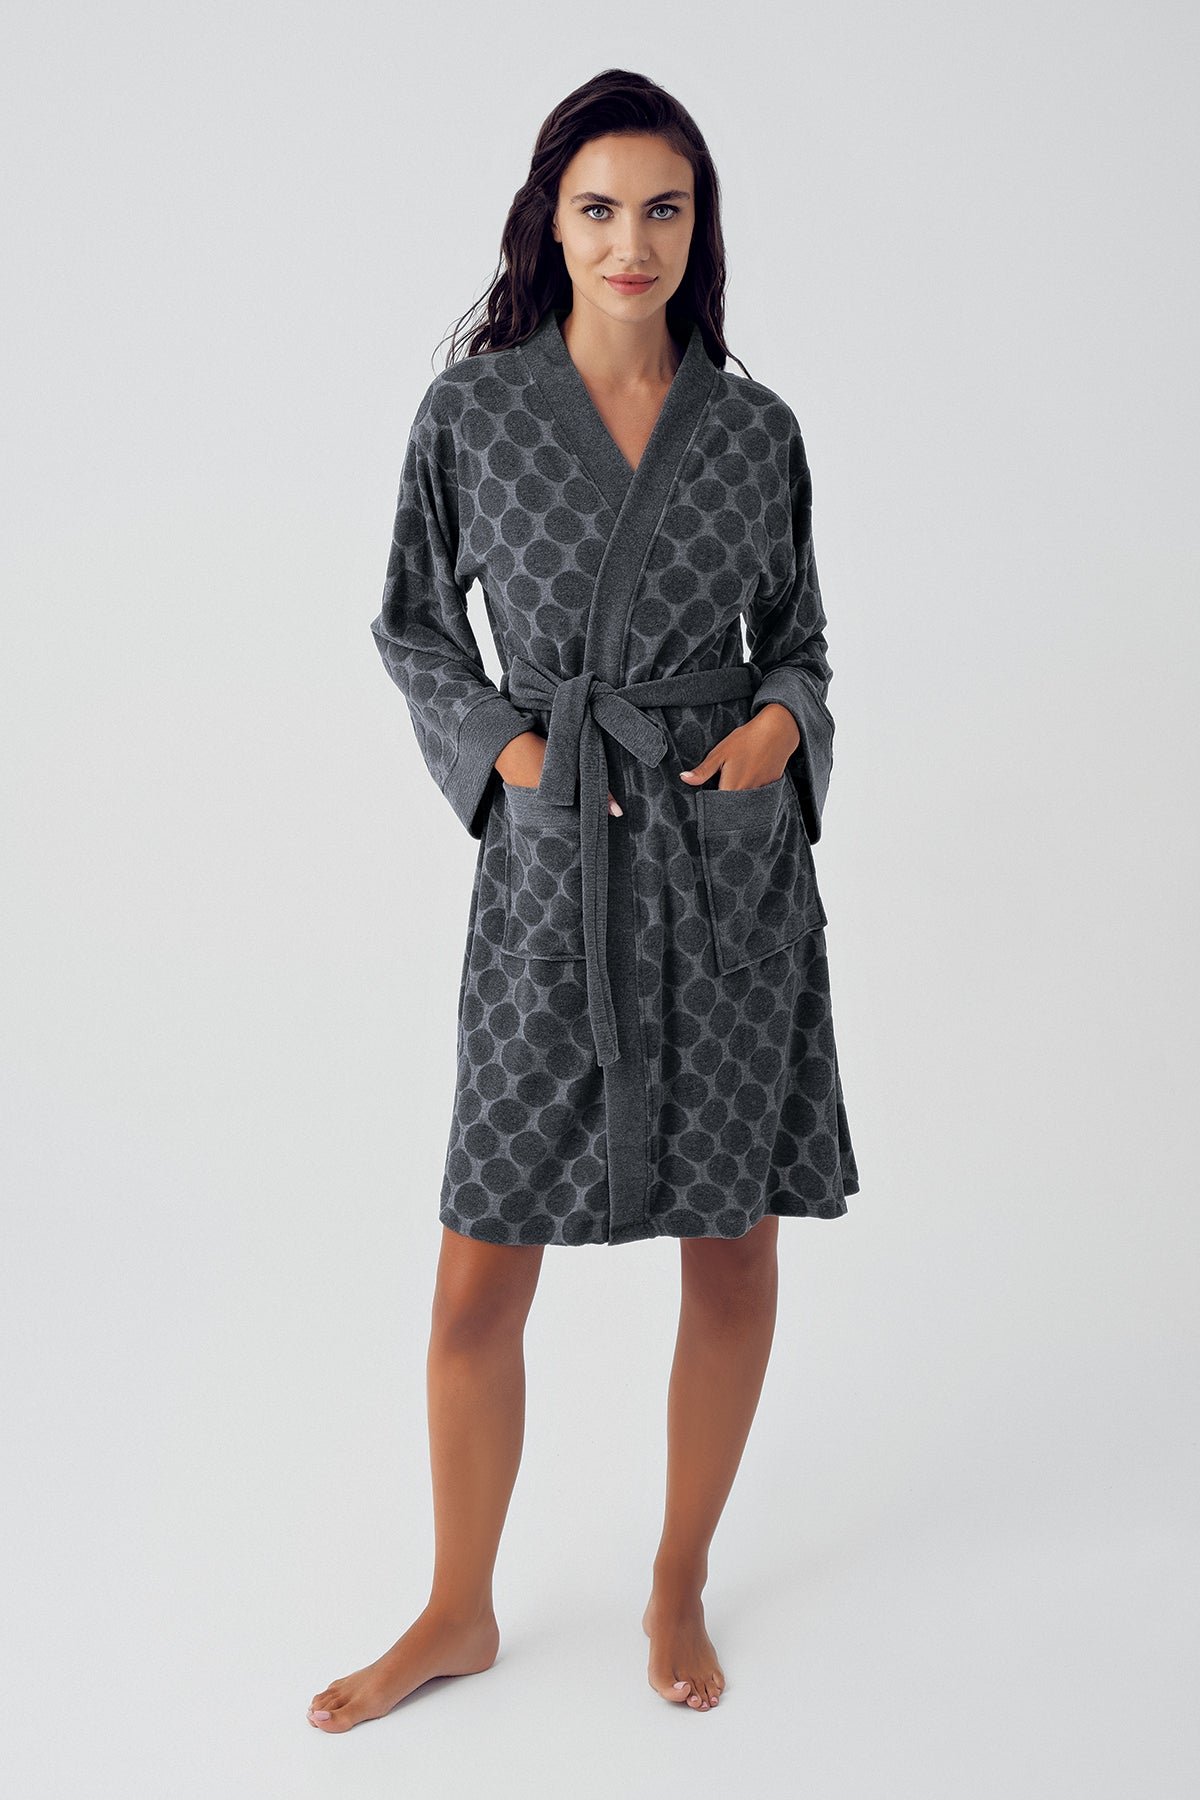 Shopymommy 15501 Terry Jacquard Short Maternity Robe Anthracite